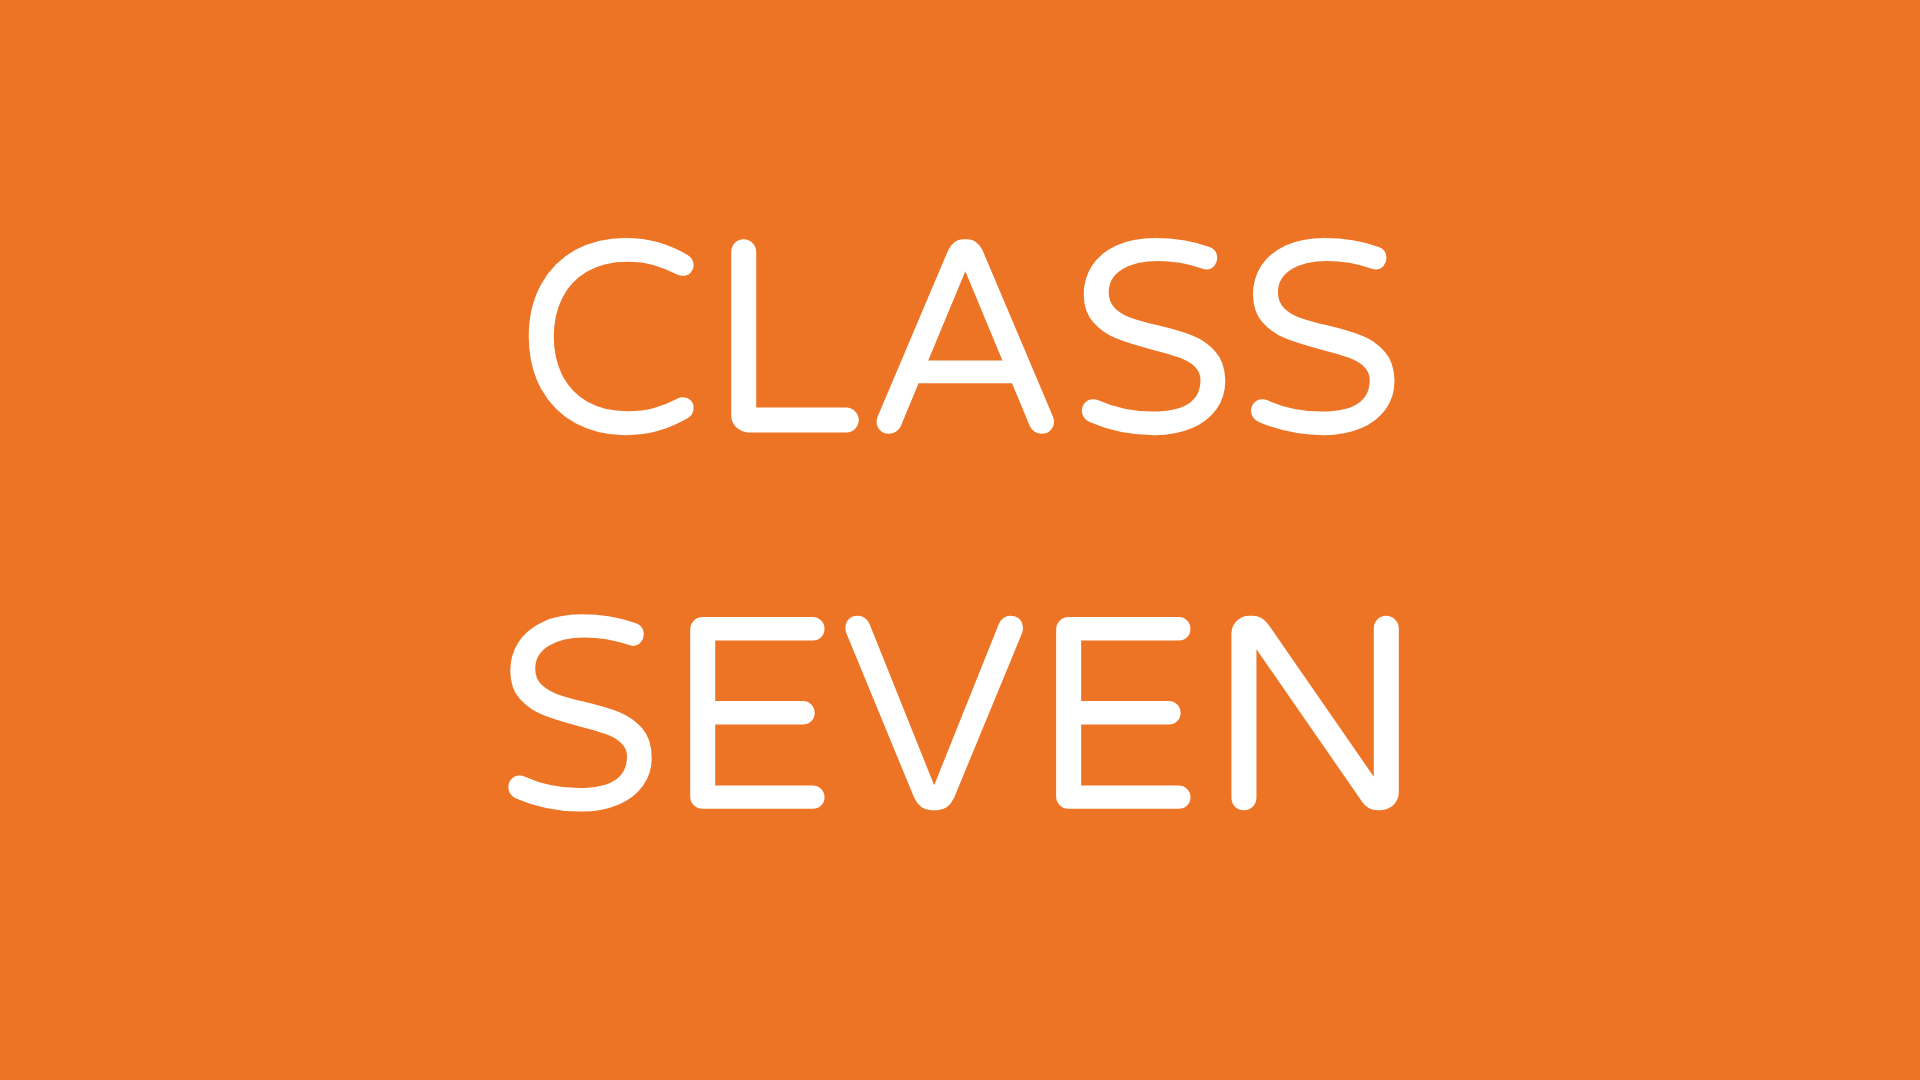 Remote Class Seven Cleaning Business Coaching